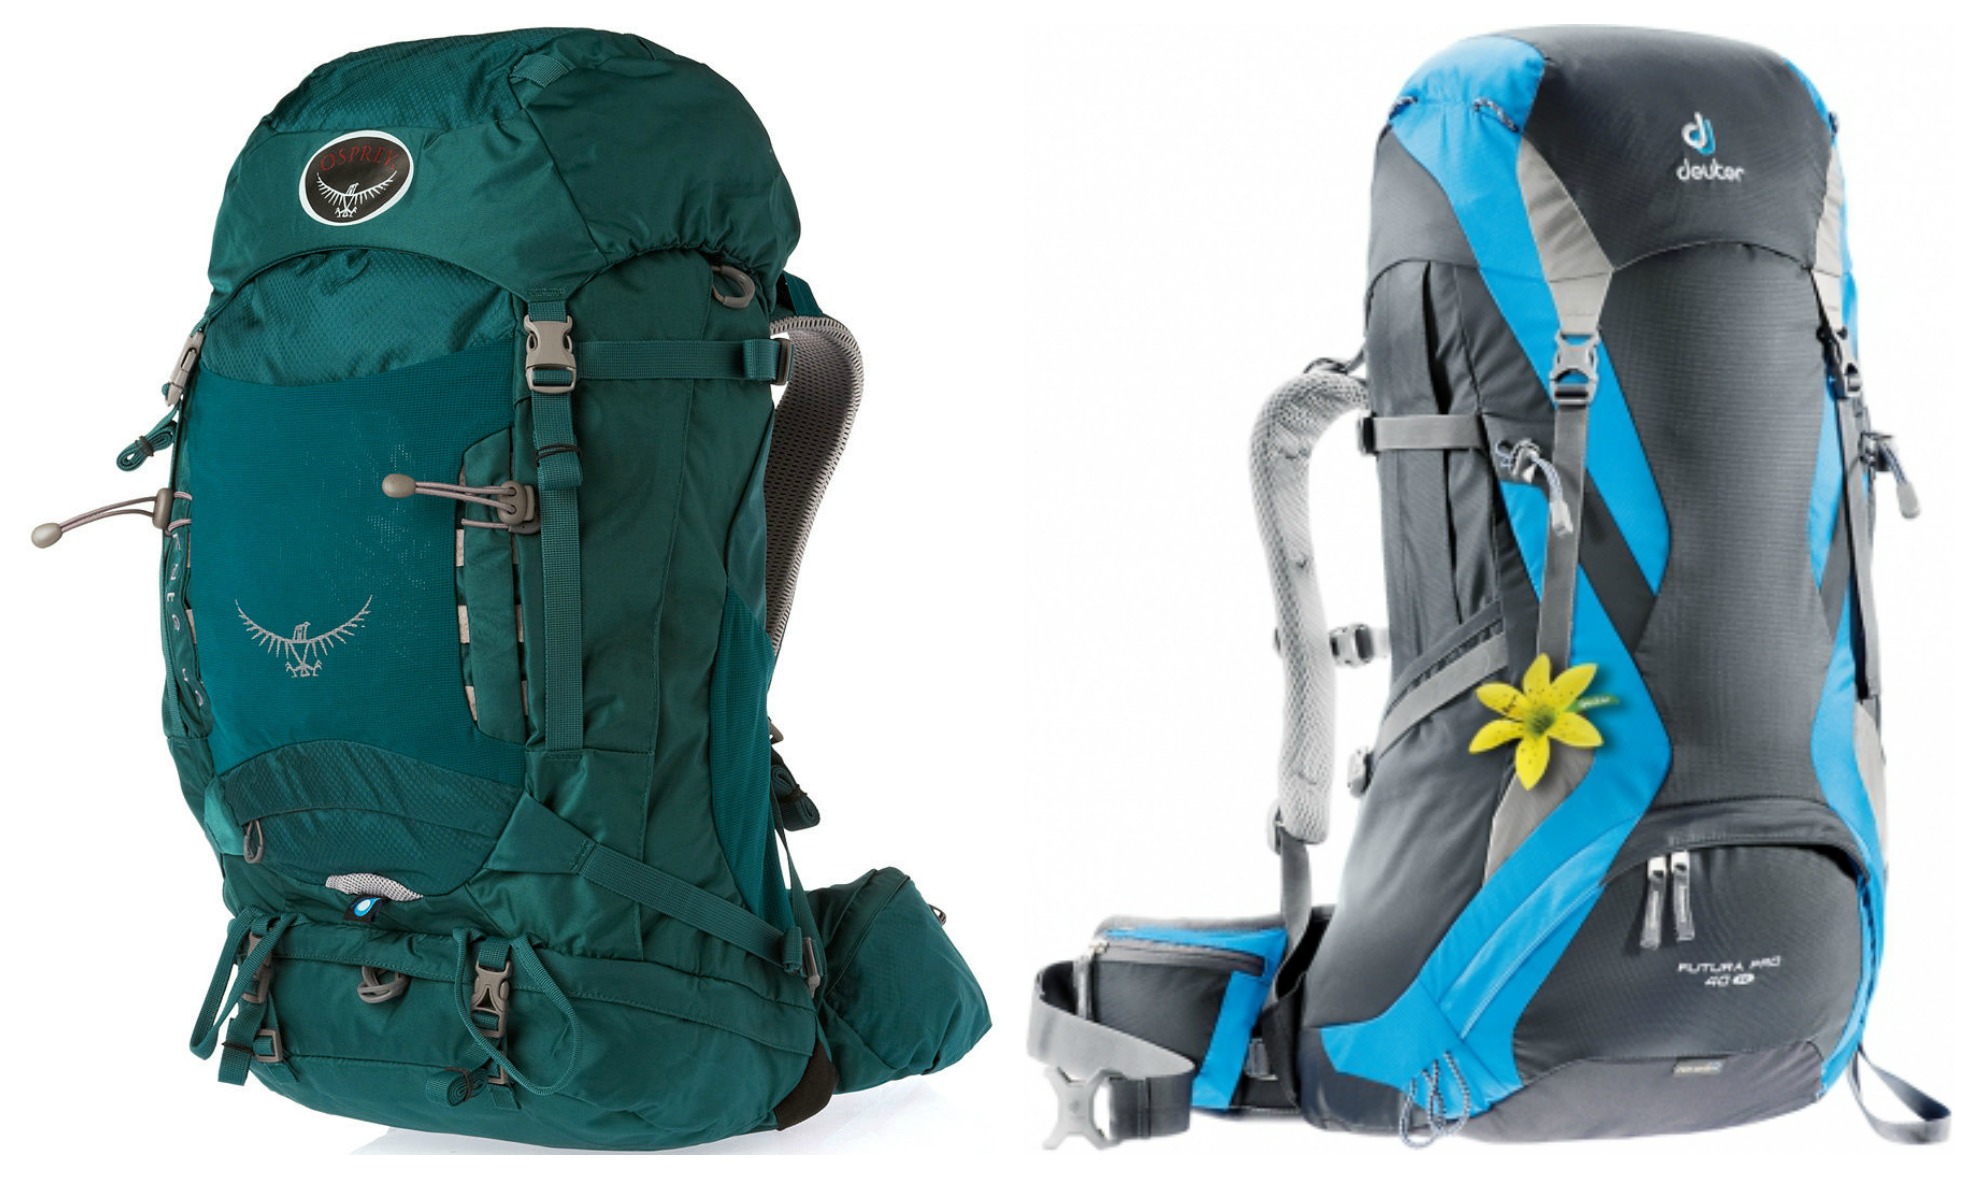 Travelettes » How to choose the right backpack | Travelettes